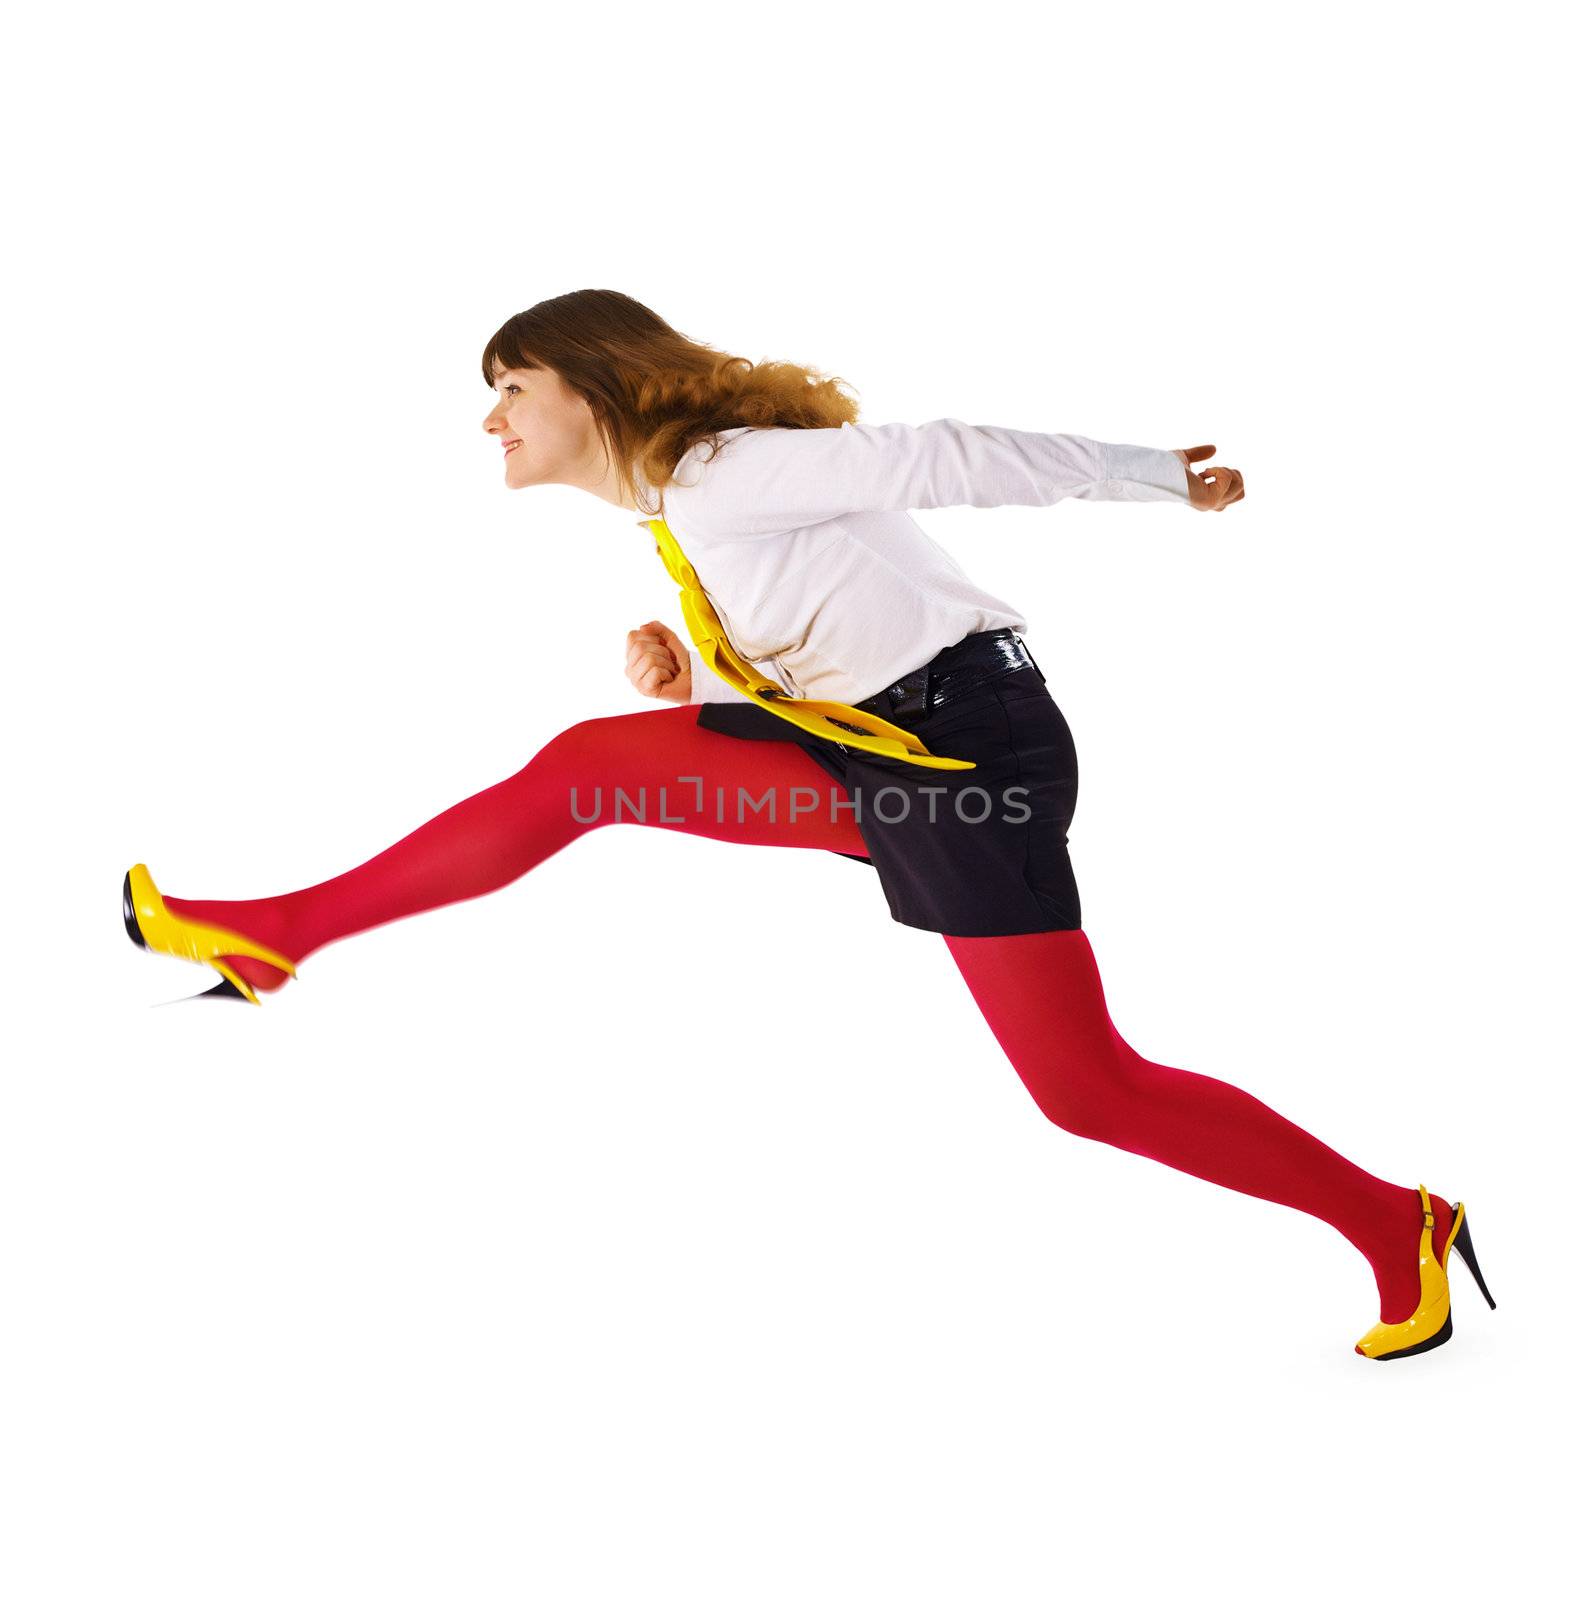 The business woman speeds up somewhere hurrying up isolated on white background